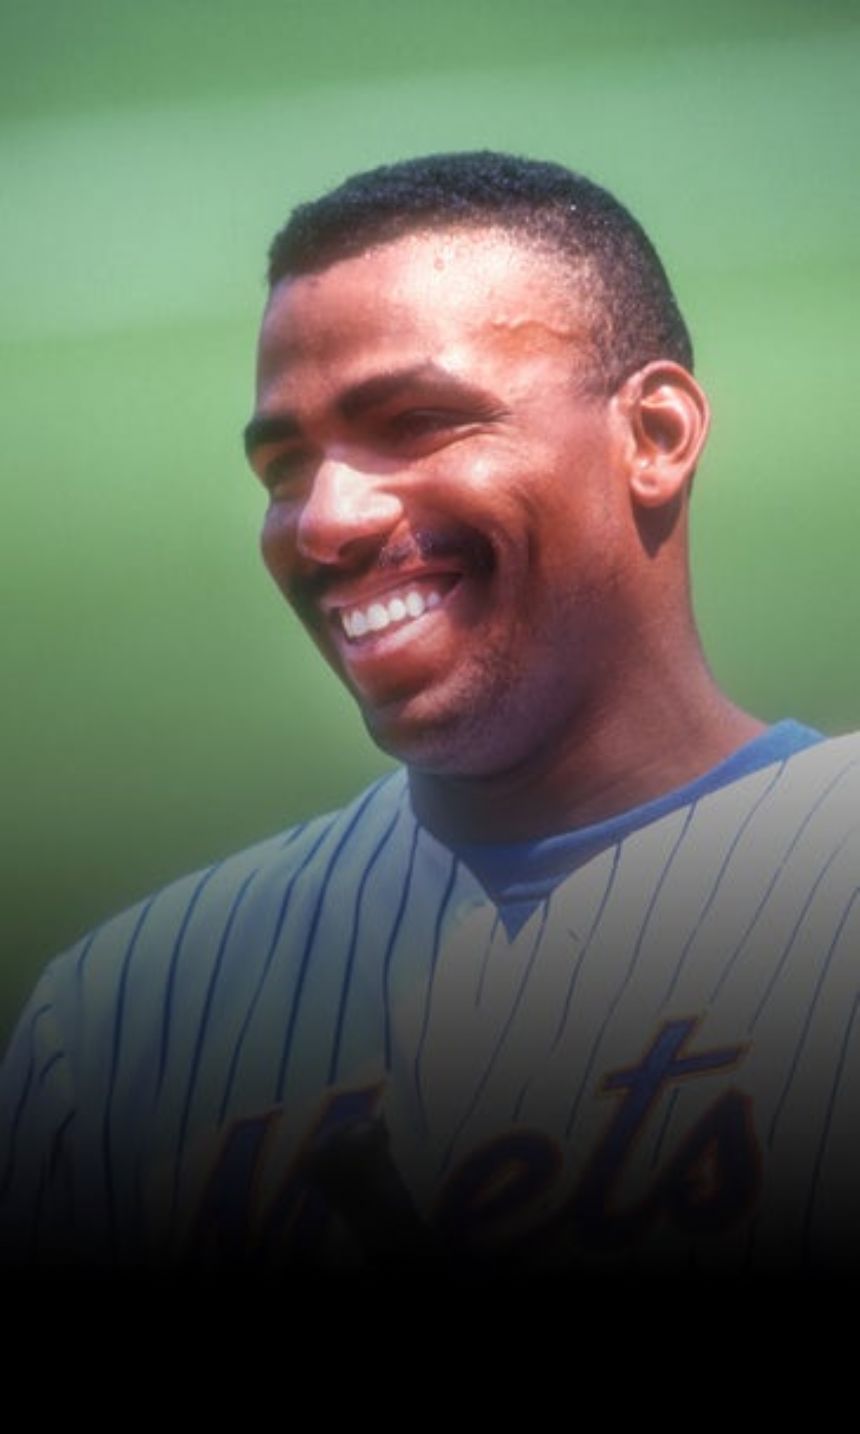 Bobby Bonilla's New York Mets contract sells for $180K at auction